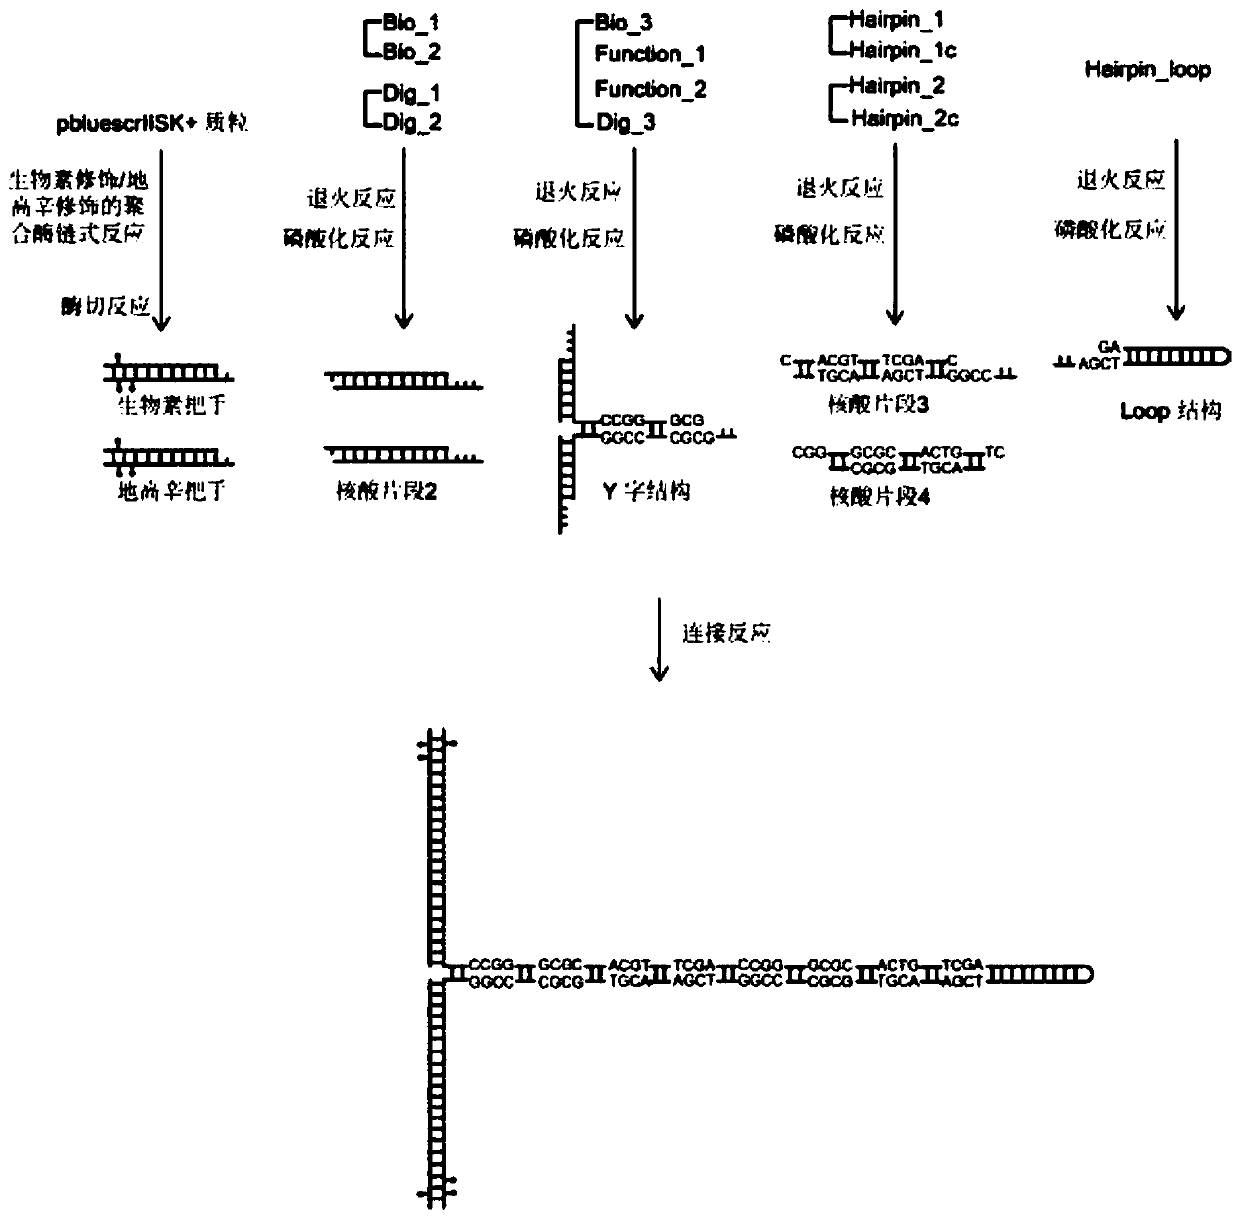 Hairpin structure containing CpG site and monomolecular mechanical method for measuring influence of CpG adjacent sequences on protein dissociation time constant